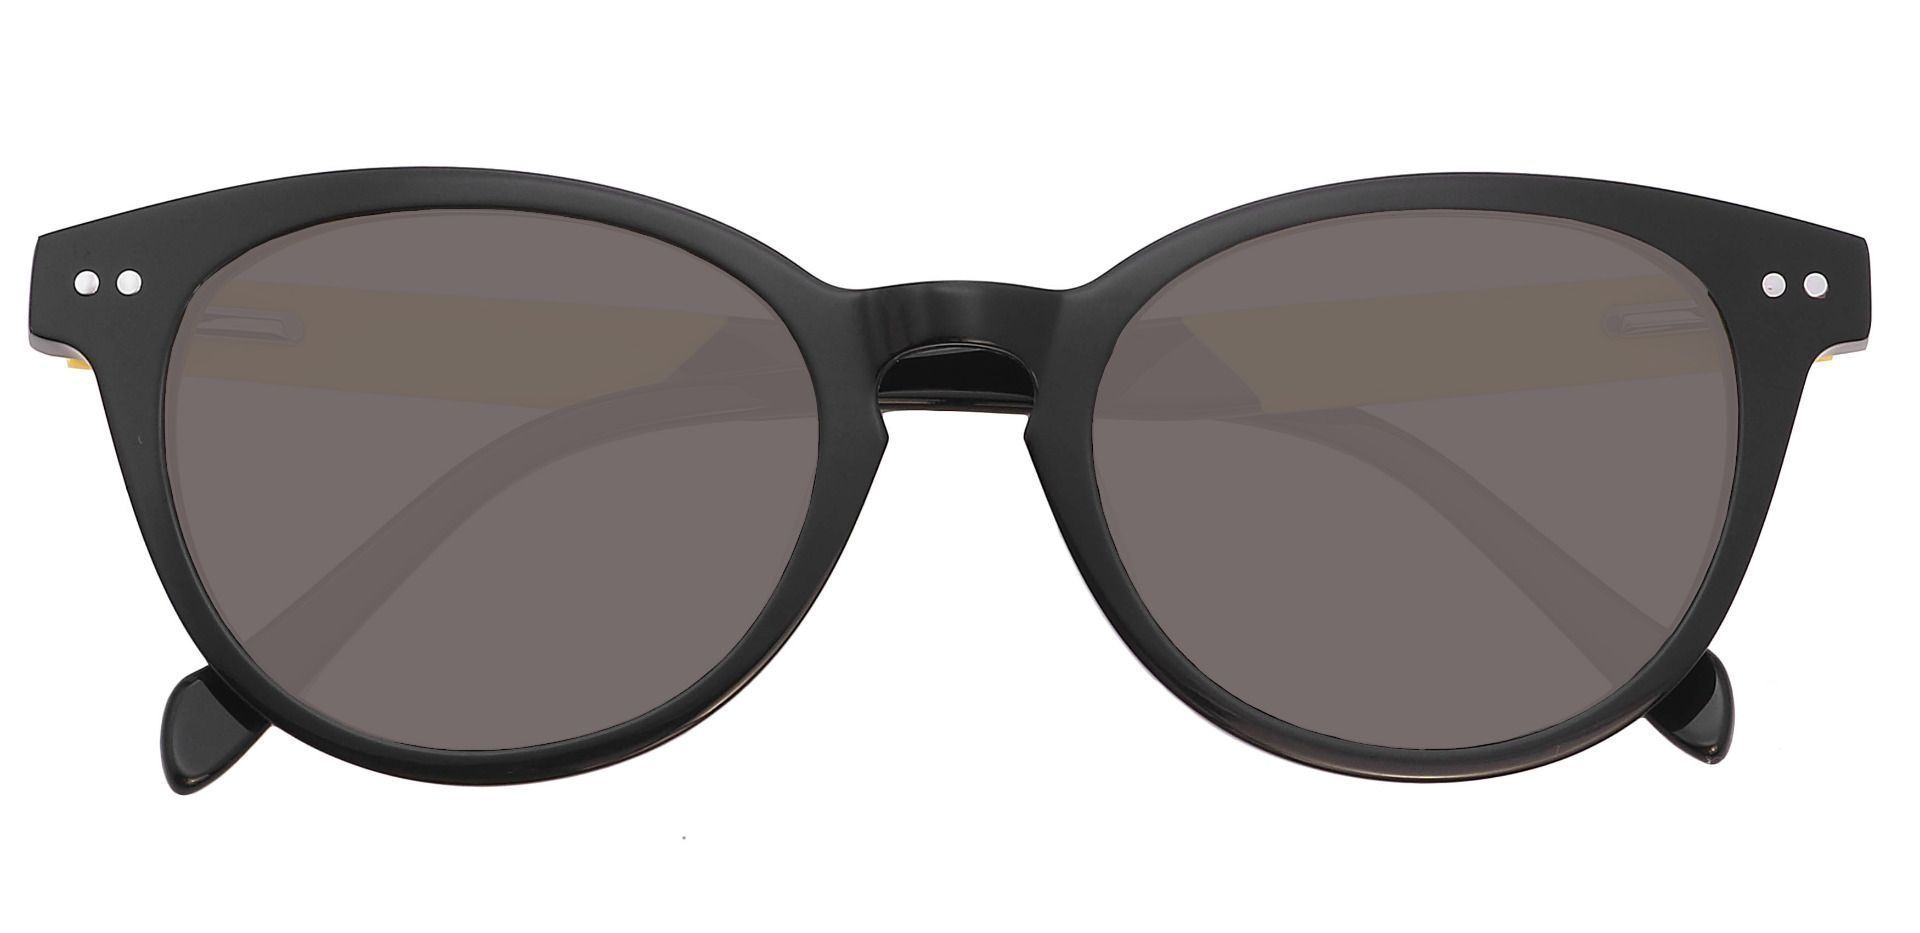 Forbes Oval Reading Sunglasses - Black Frame With Gray Lenses